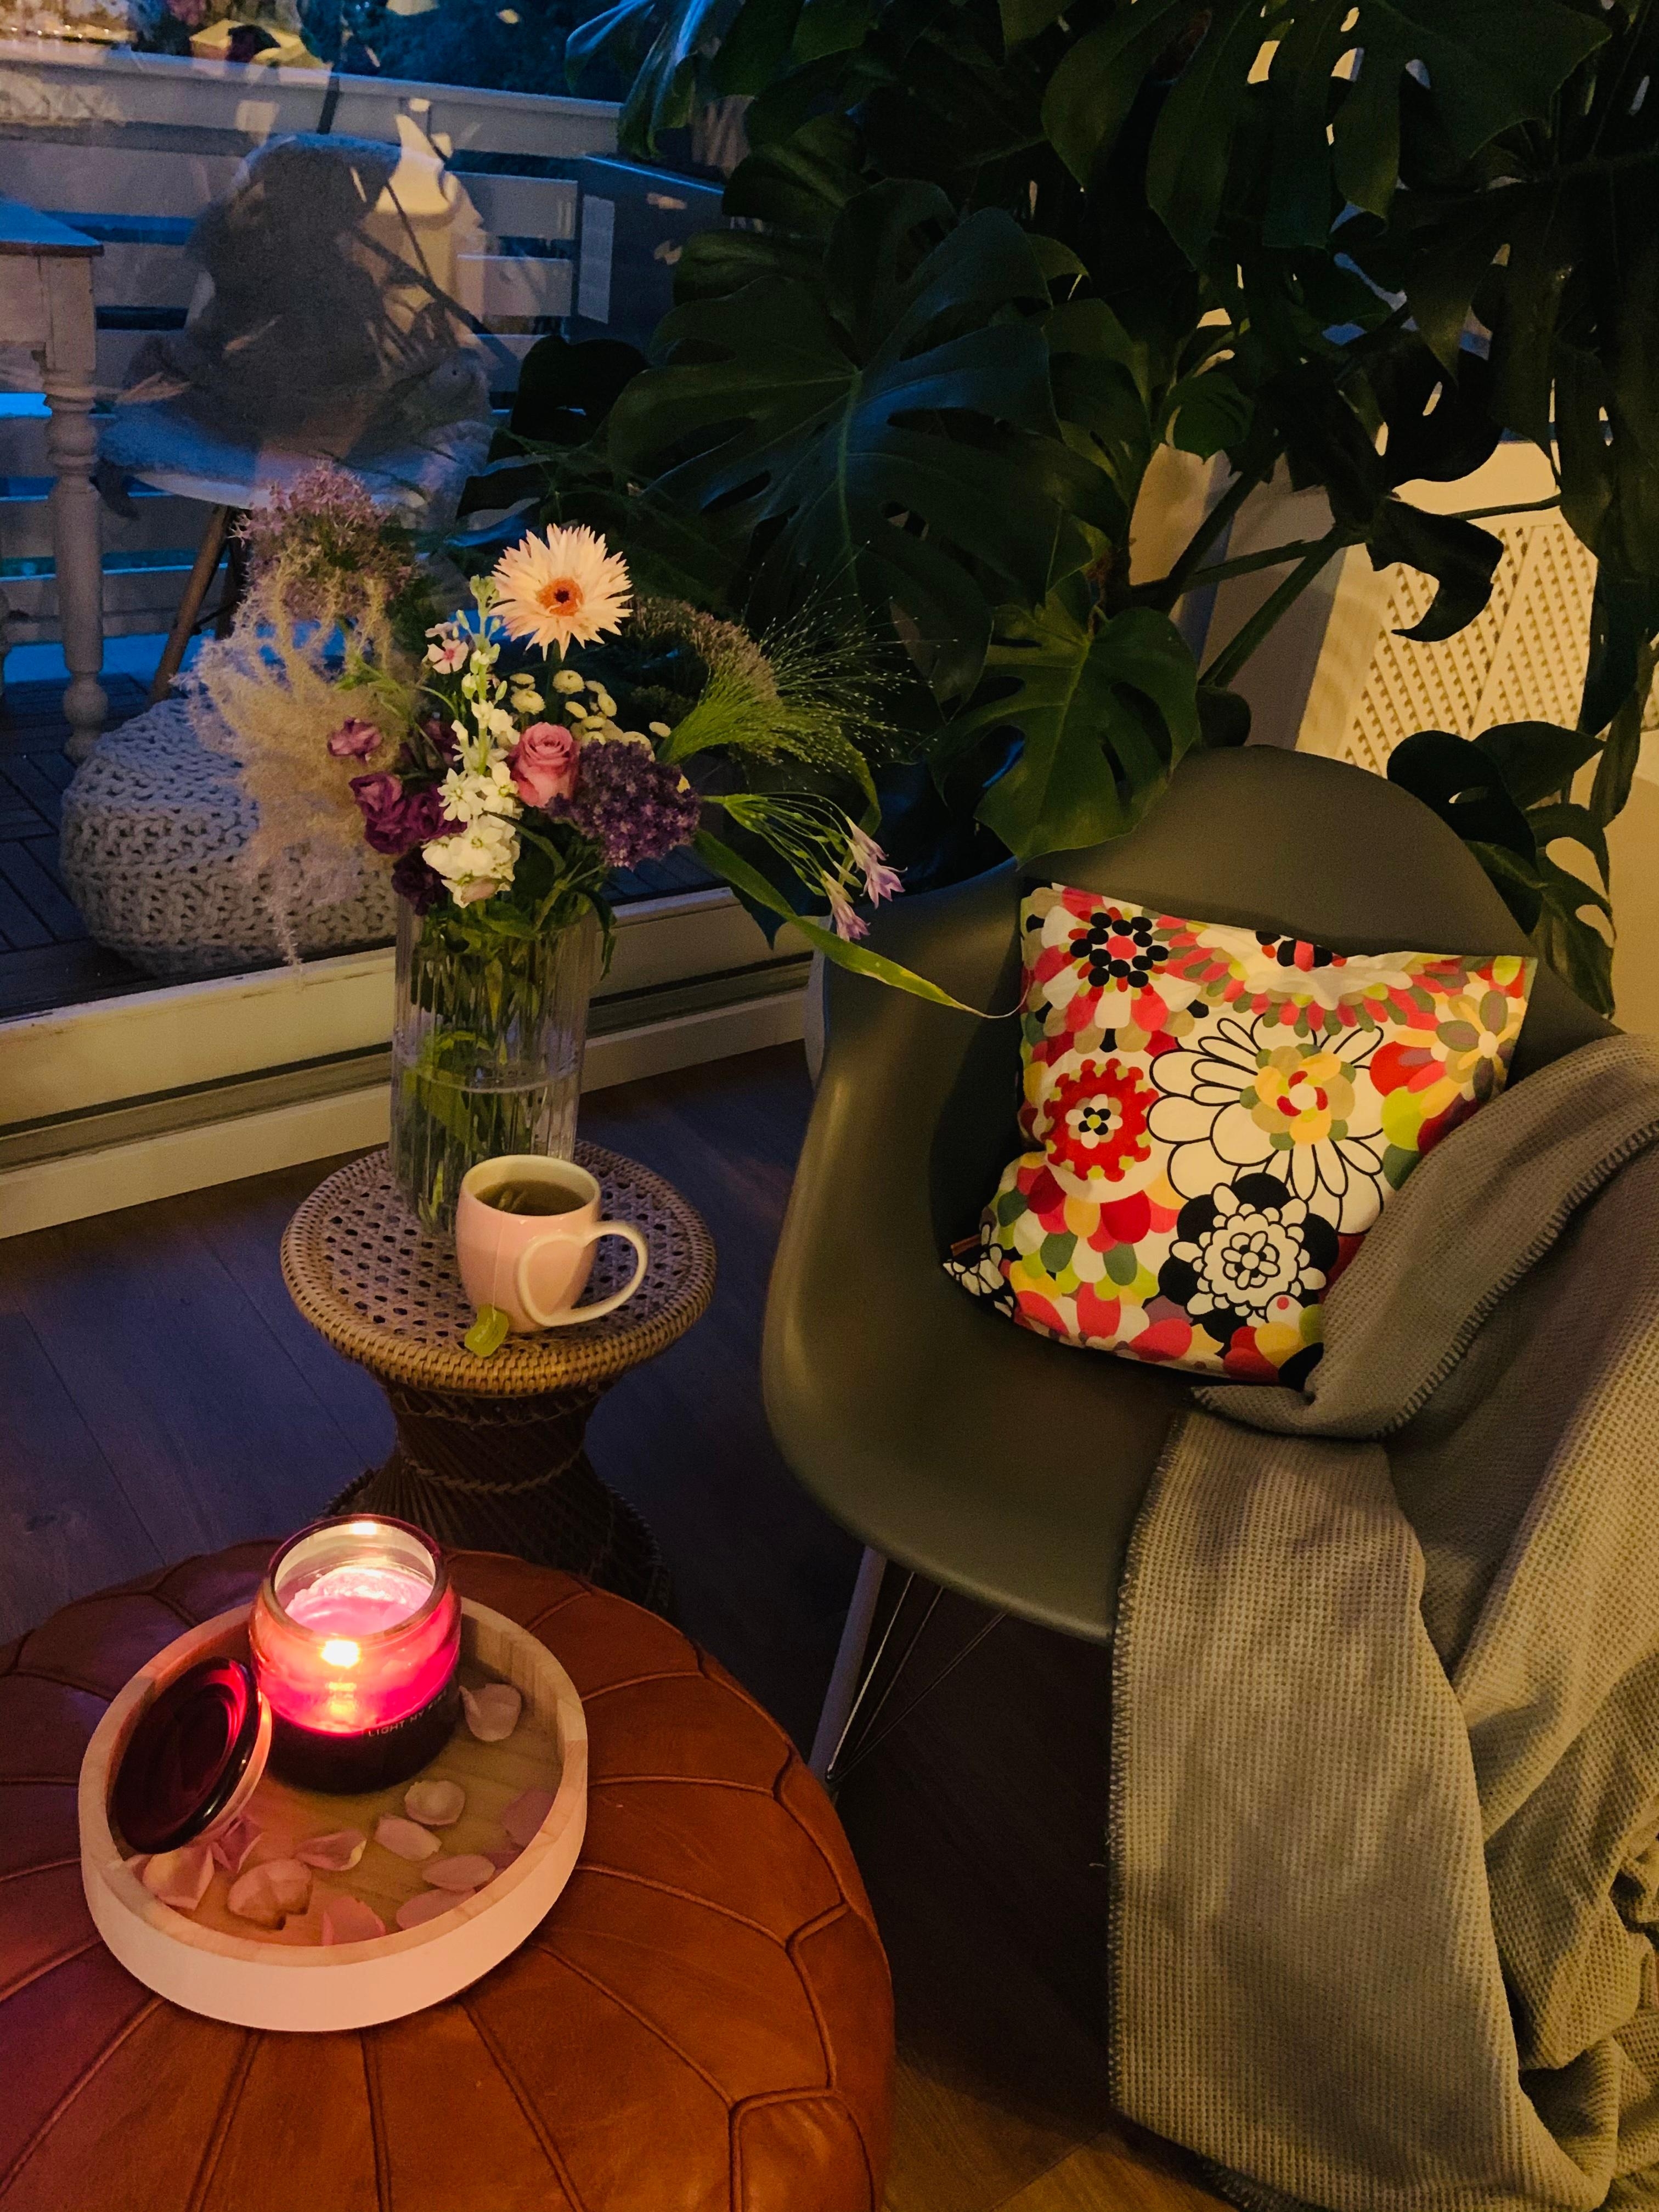 Have a happy evening boys and girls!
#candlelight #teatime #hygge #cosy #flowers# detailverliebt #plantlove